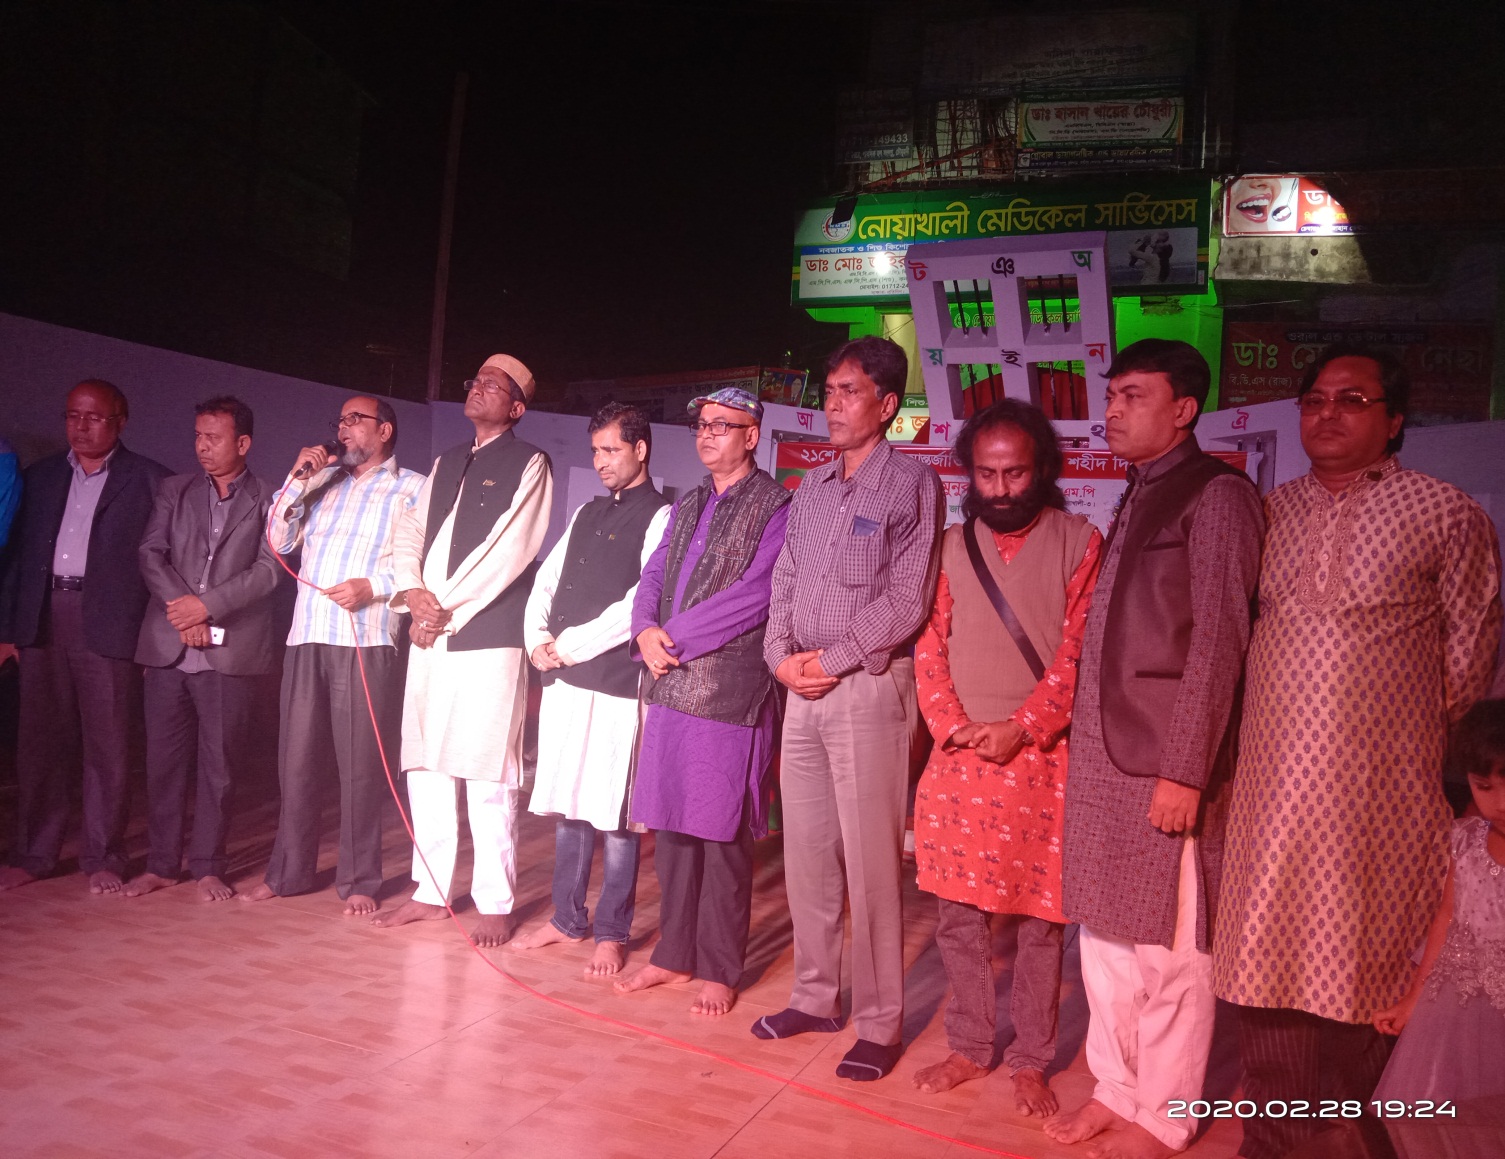 In the picture- On the occasion of Ekushay February’ 2020 Begumganj Sangskritik Jote organized a cultural event. Upazila Chairman Omar Faruk Badsha attend as chief guest, Vice chairman Nur Hossain Masud as special guest and Begumganj-Sonaimuri Shikka O Sastho Unnayan Foundation chairman Md. Giash Uddin Mithu is seen among the leaders of Begumganj Sangskritik jote.